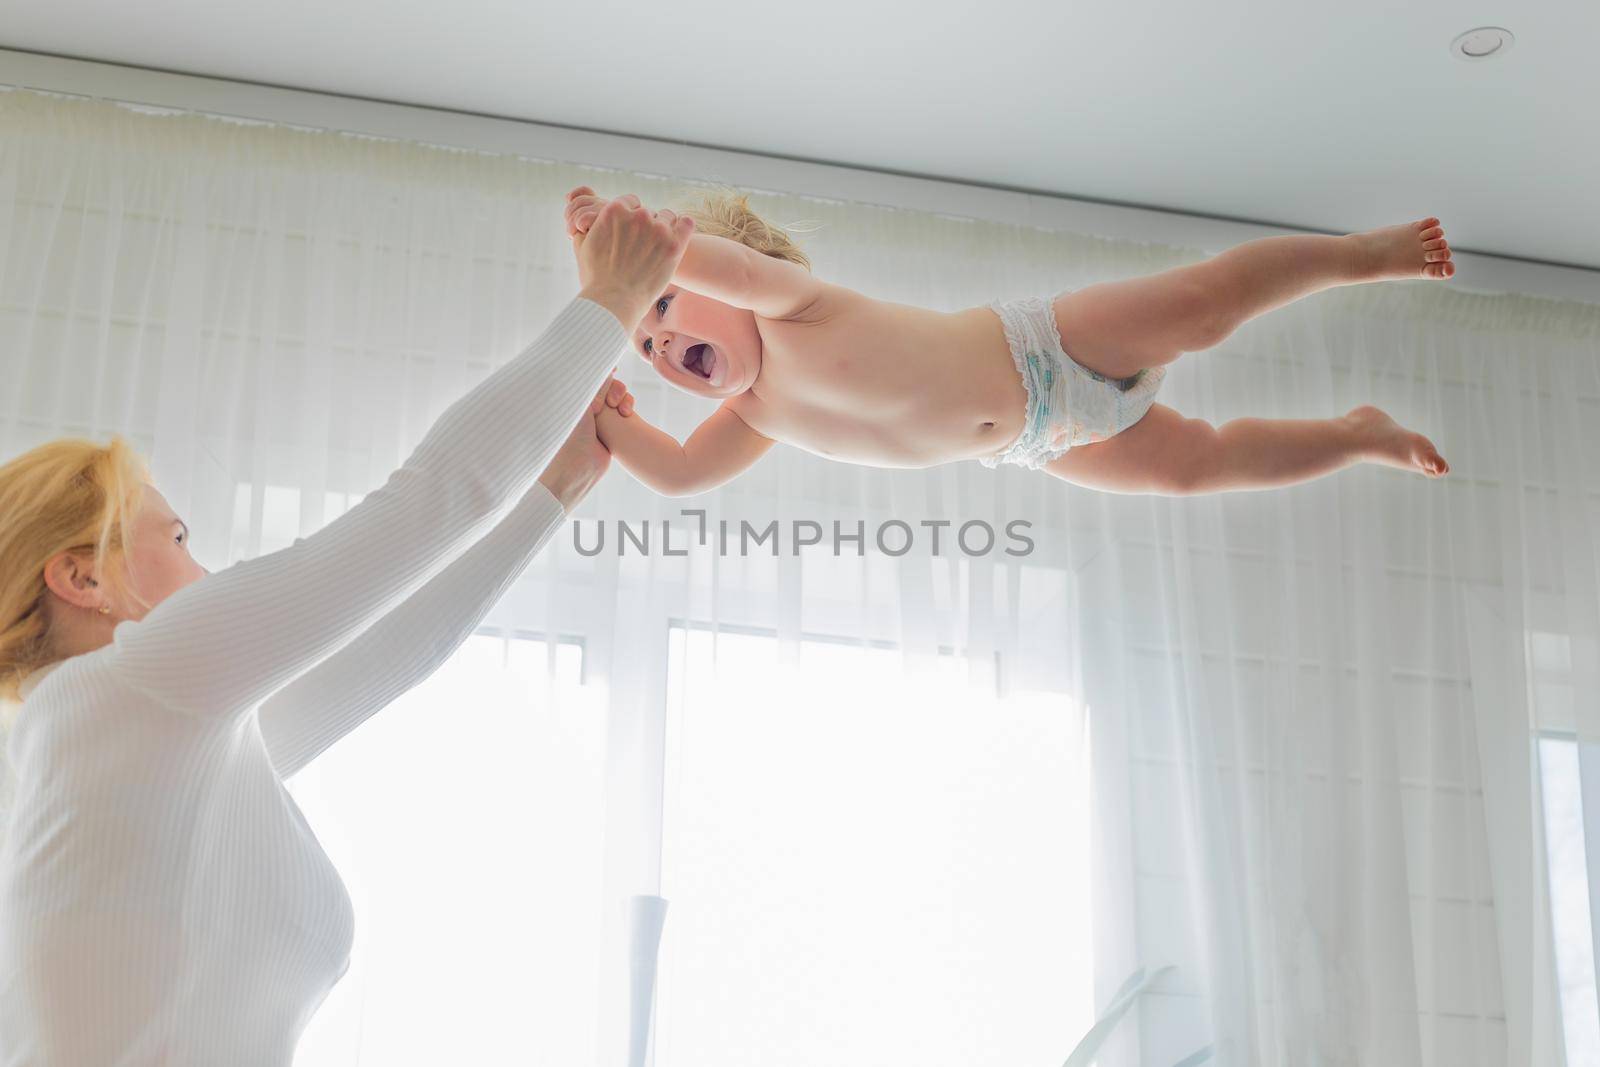 Mom, entertaining the baby, throws him up, rejoicing and having fun.